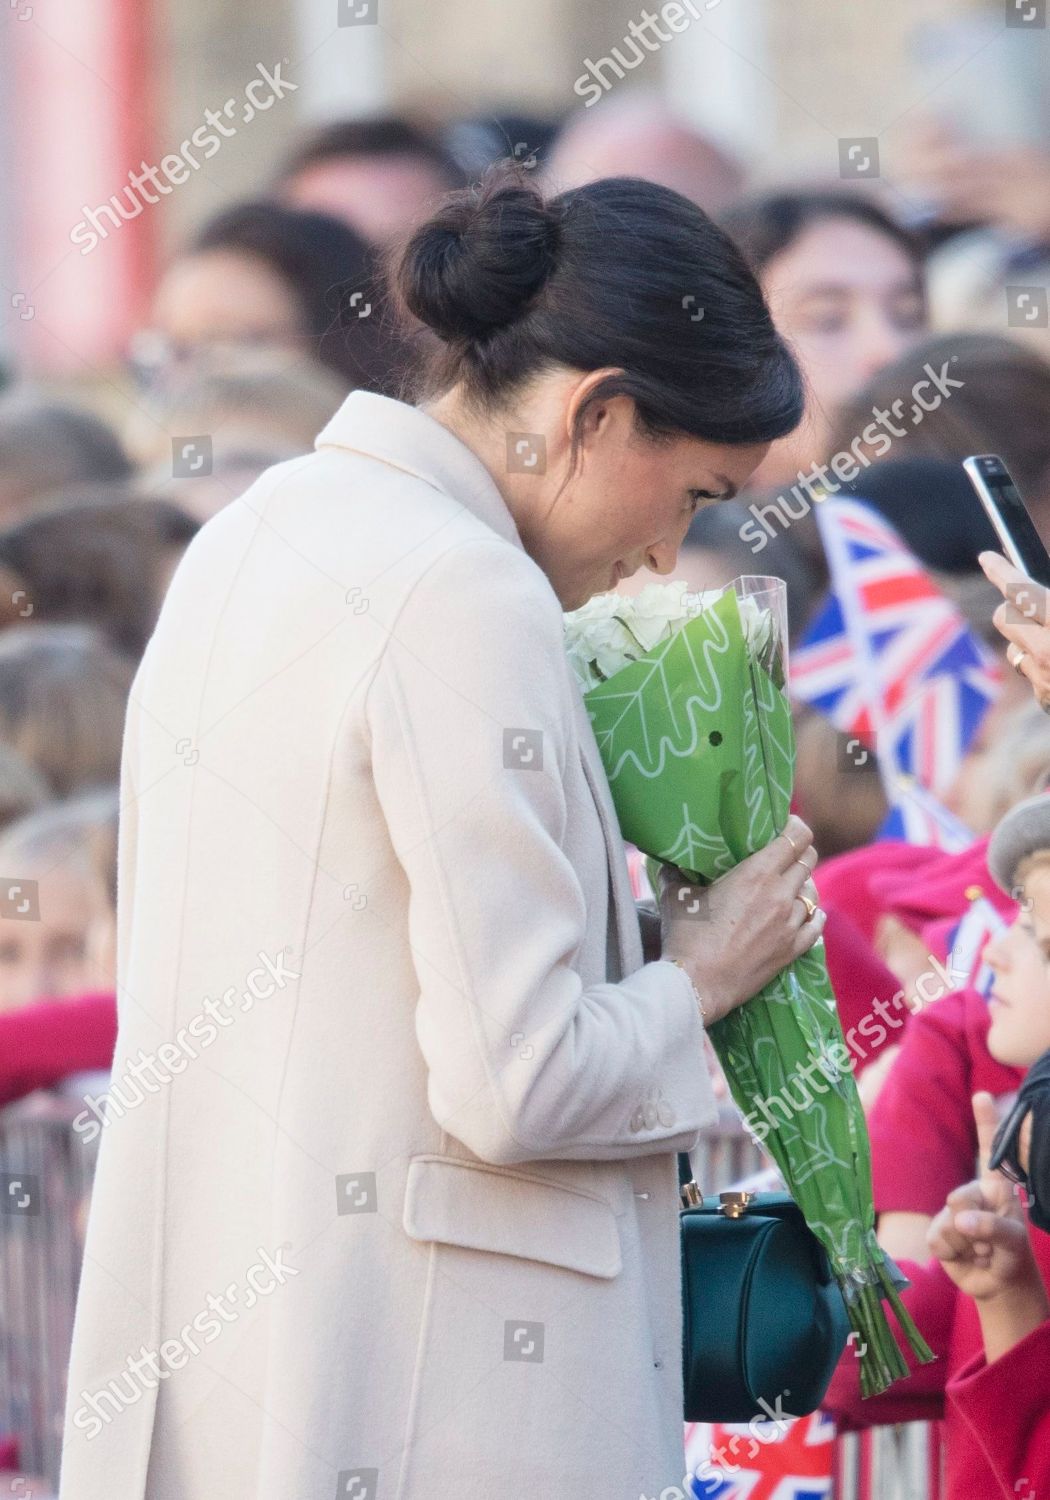 prince-harry-and-meghan-duchess-of-sussex-visit-to-sussex-uk-shutterstock-editorial-9912893i.jpg